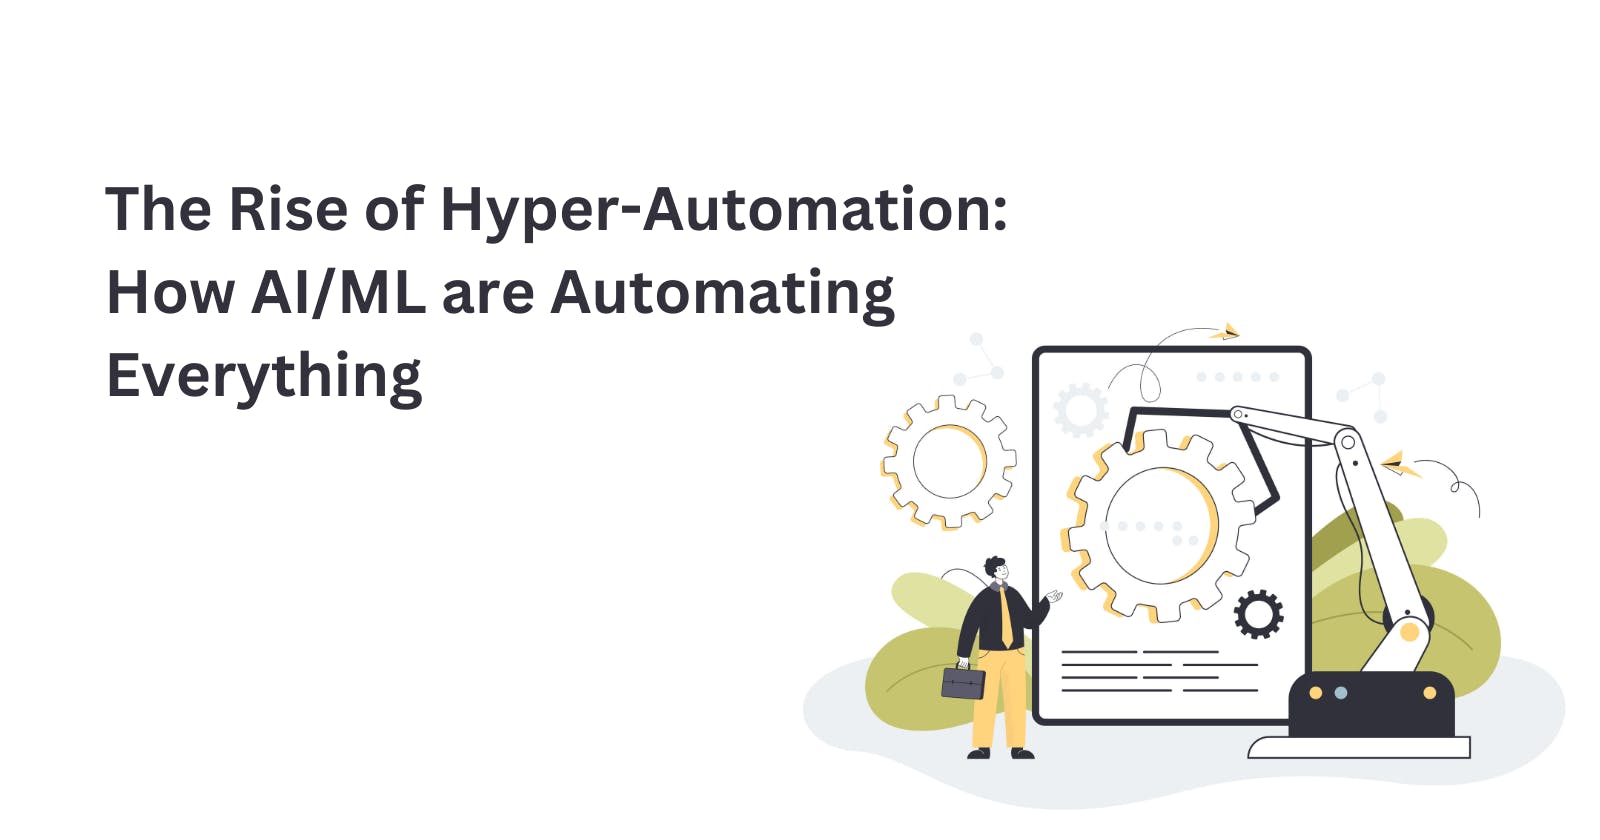 The Rise of Hyper-Automation: How AI and ML are Automating Everything